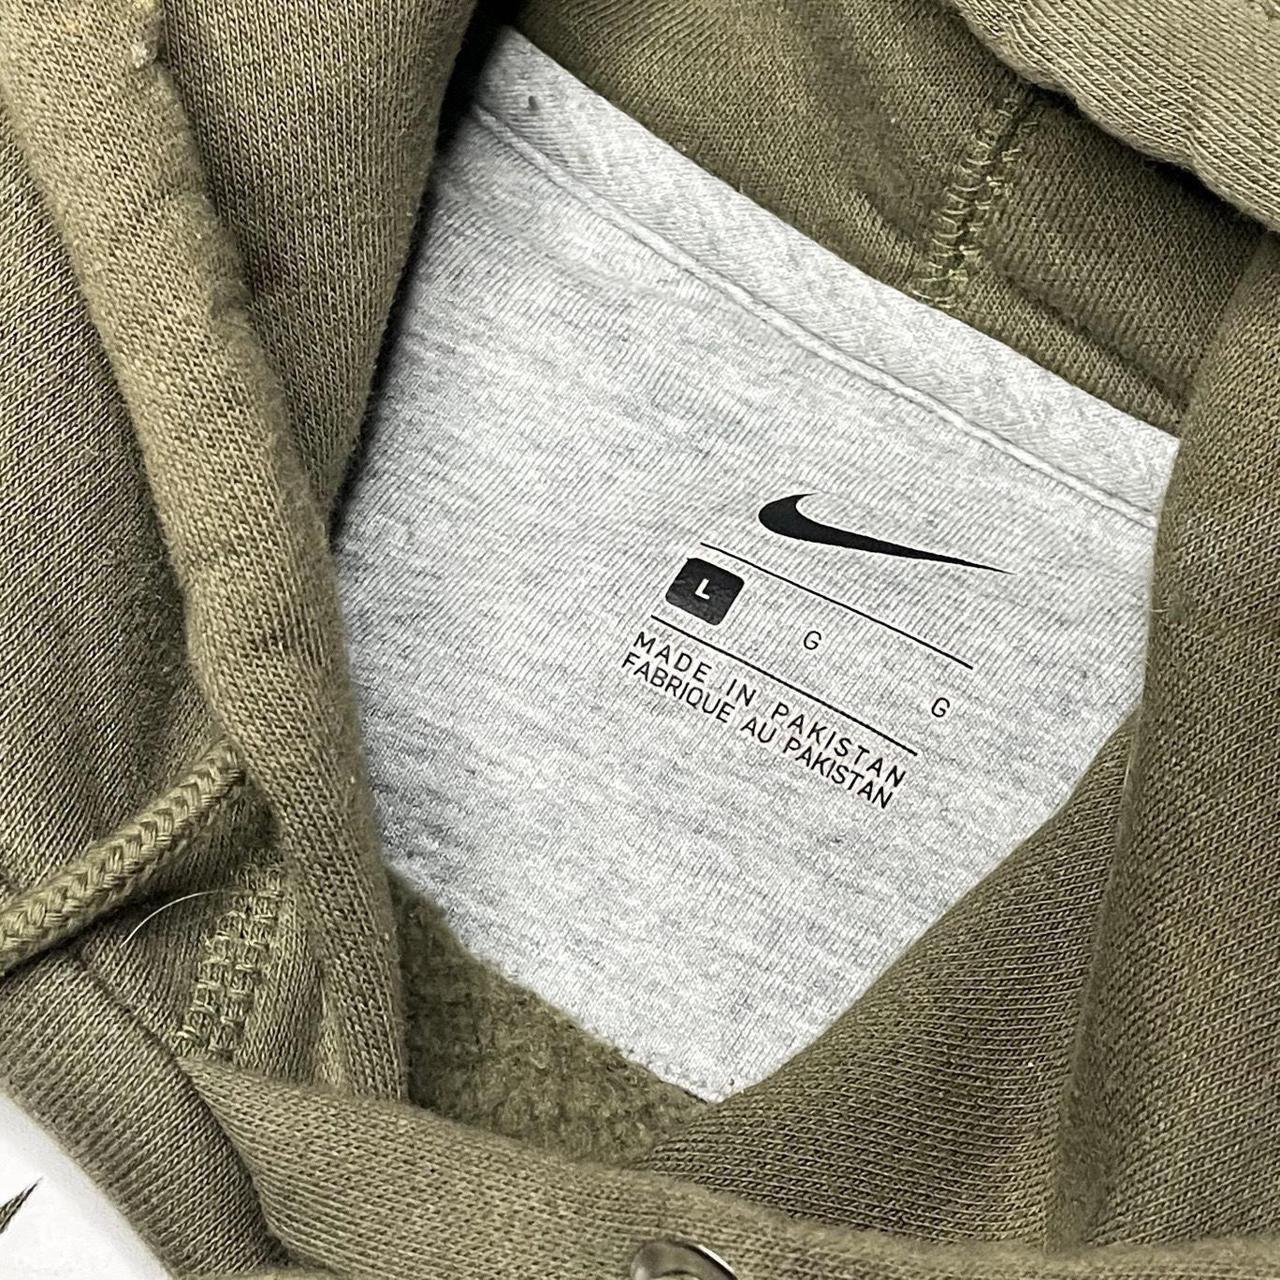 Product Image 3 - Nike Hoodie

- Adult L
- Great